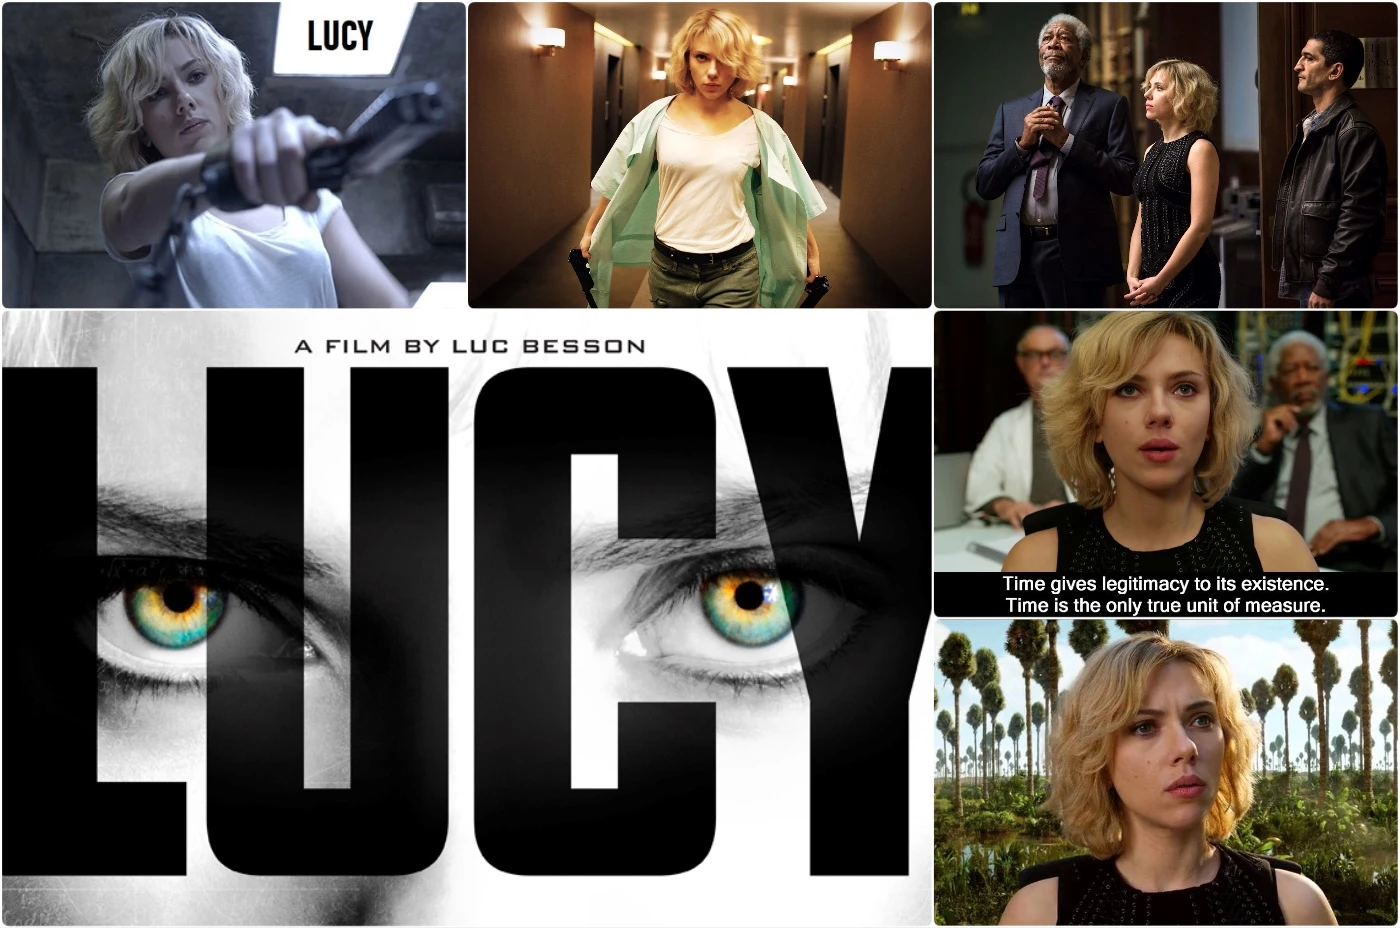 Lucy (2014) - movies like divergent